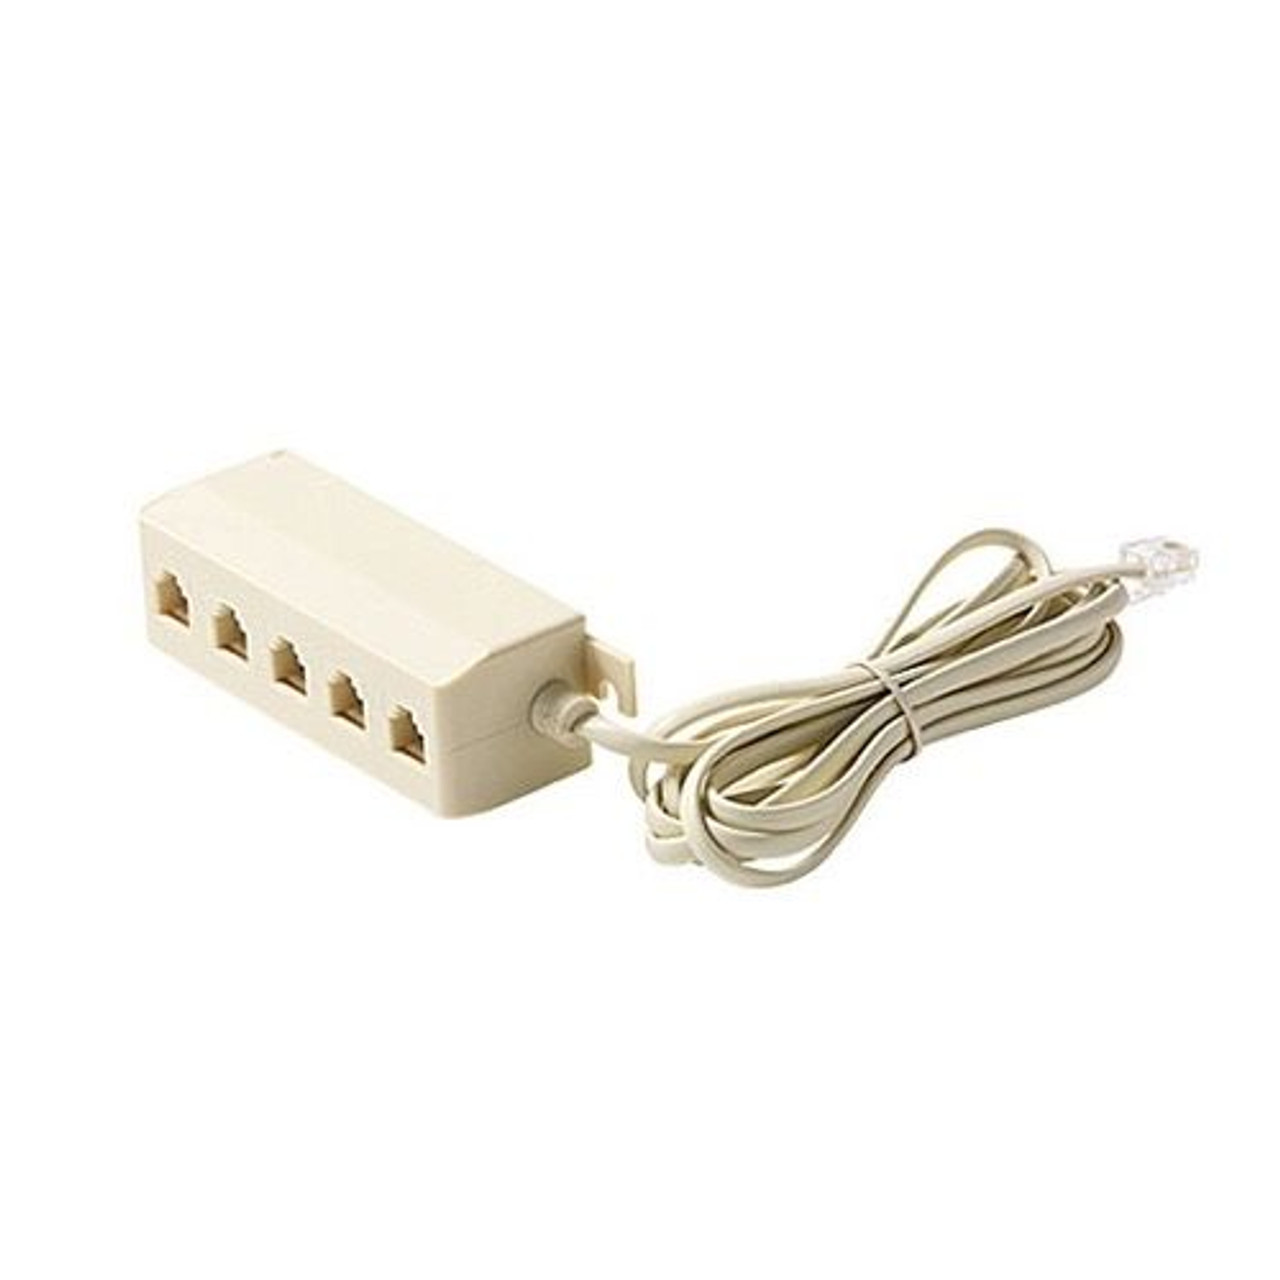 GE 5 Way Phone Splitter Jack Modular 6.5' Ft Cord Extension Cable Adapter Modular Outlet Ivory 6.5' FT Cord Extension 5 Way Splitter One Phone Outlet to 5 Telephones 5 Port Surface Mount Jack Block Junction Box